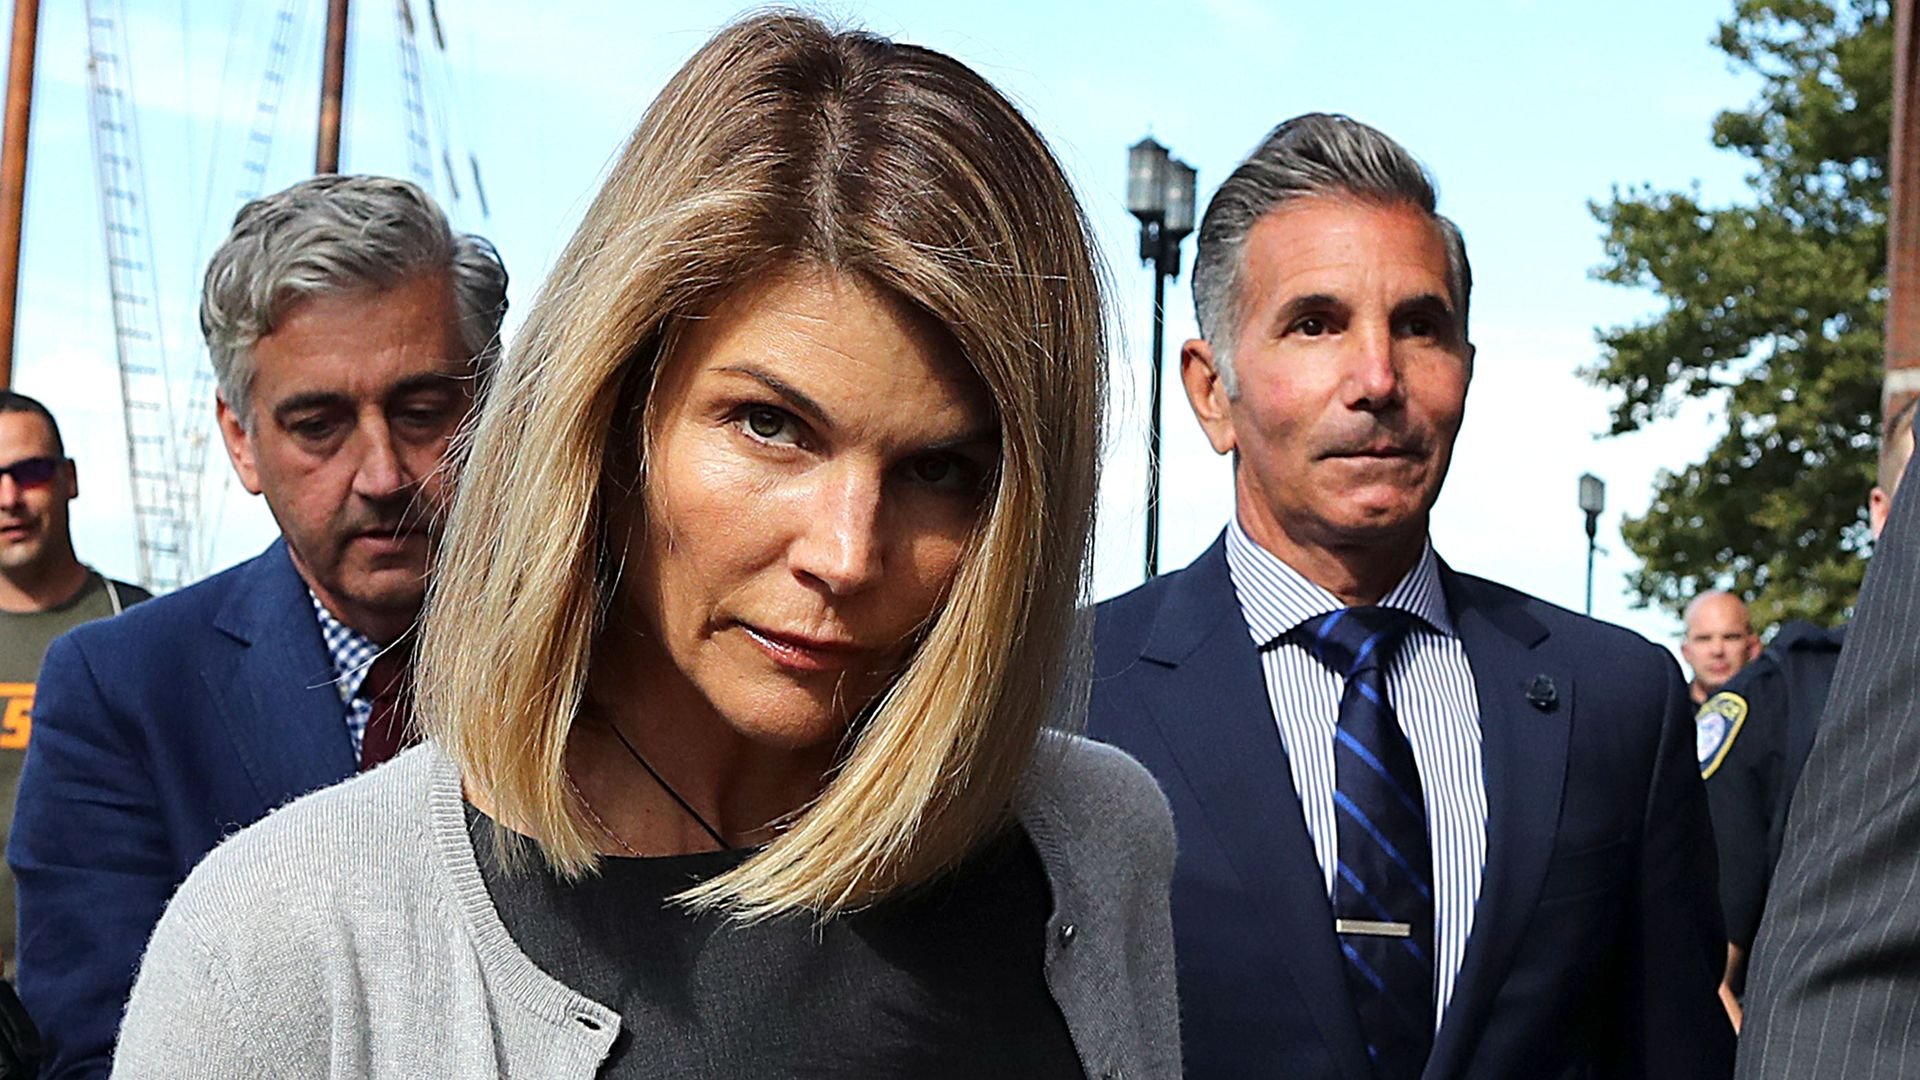 Timeline: The major developments in the college admissions scandal